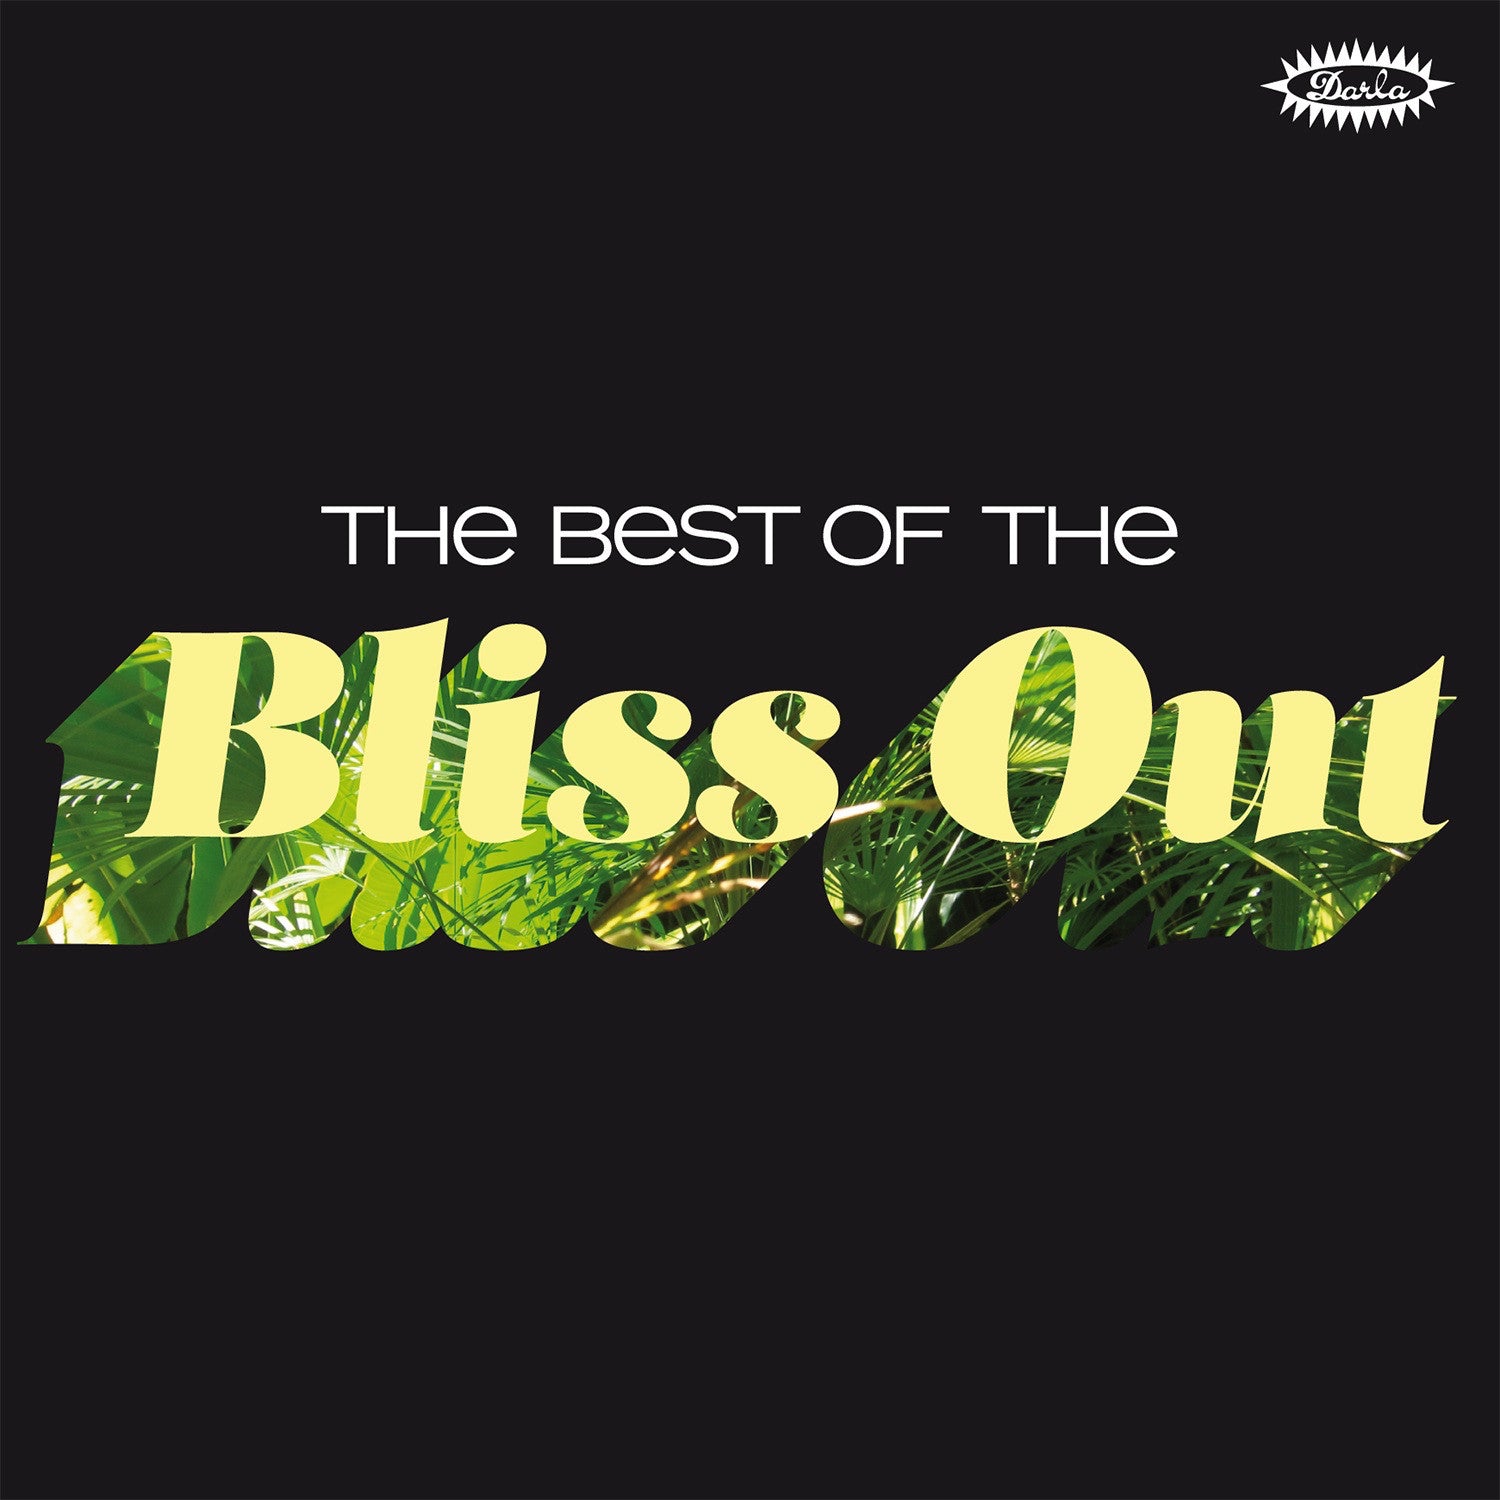 v/a - Best of the Bliss Out, The - Darla Records